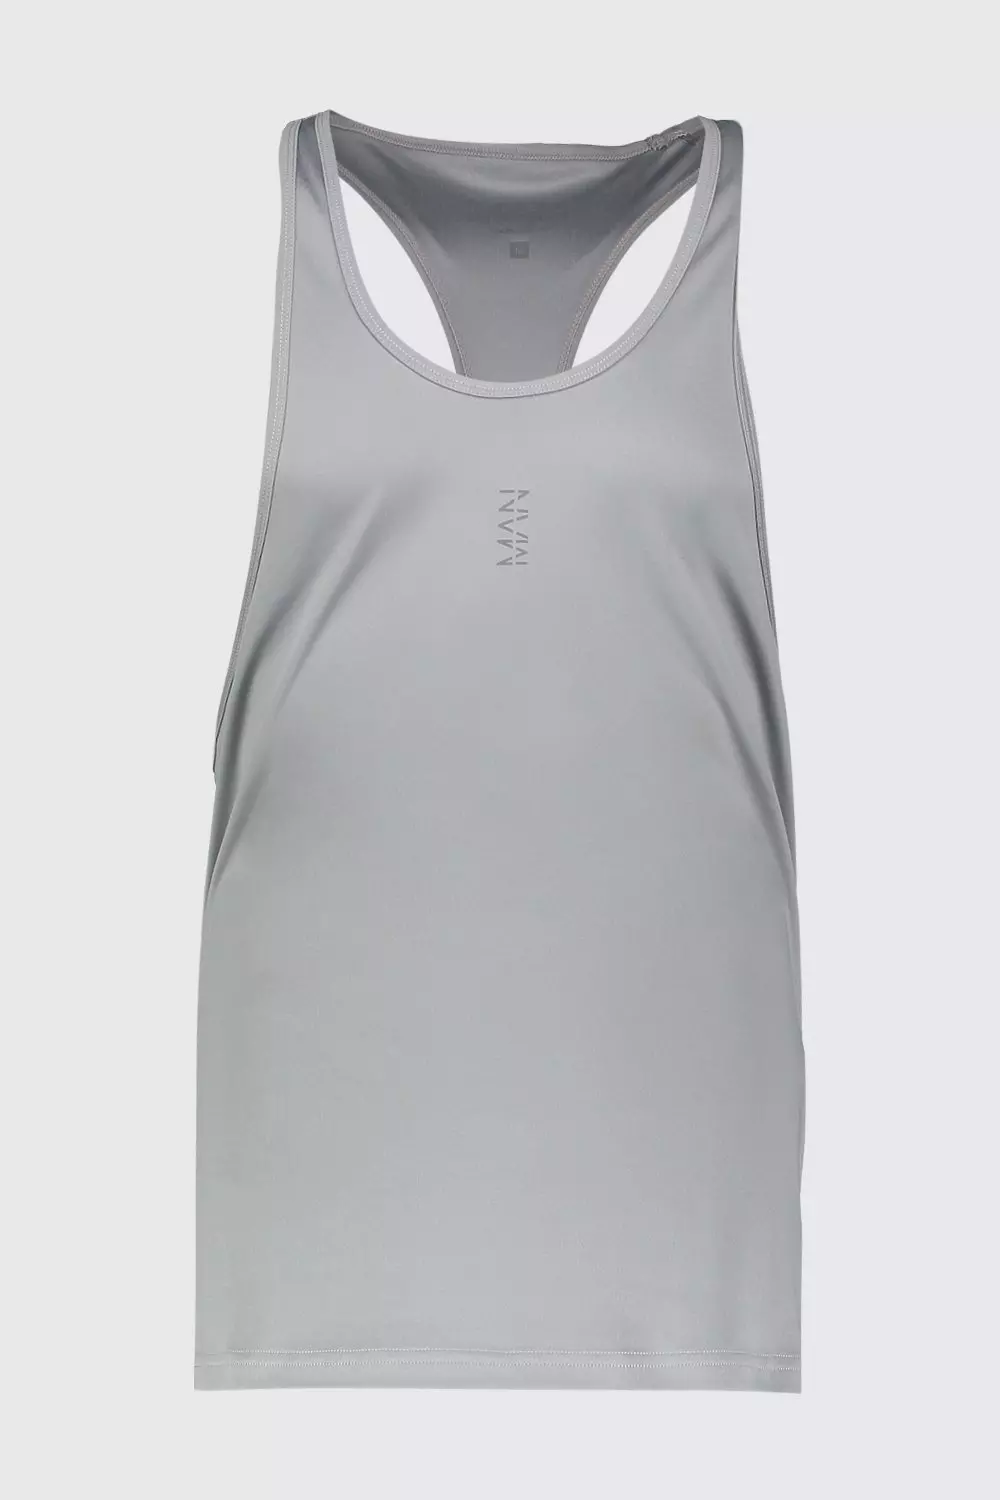 Polyester Plain Mens Gym Tank Top, Round Neck at Rs 200/piece in